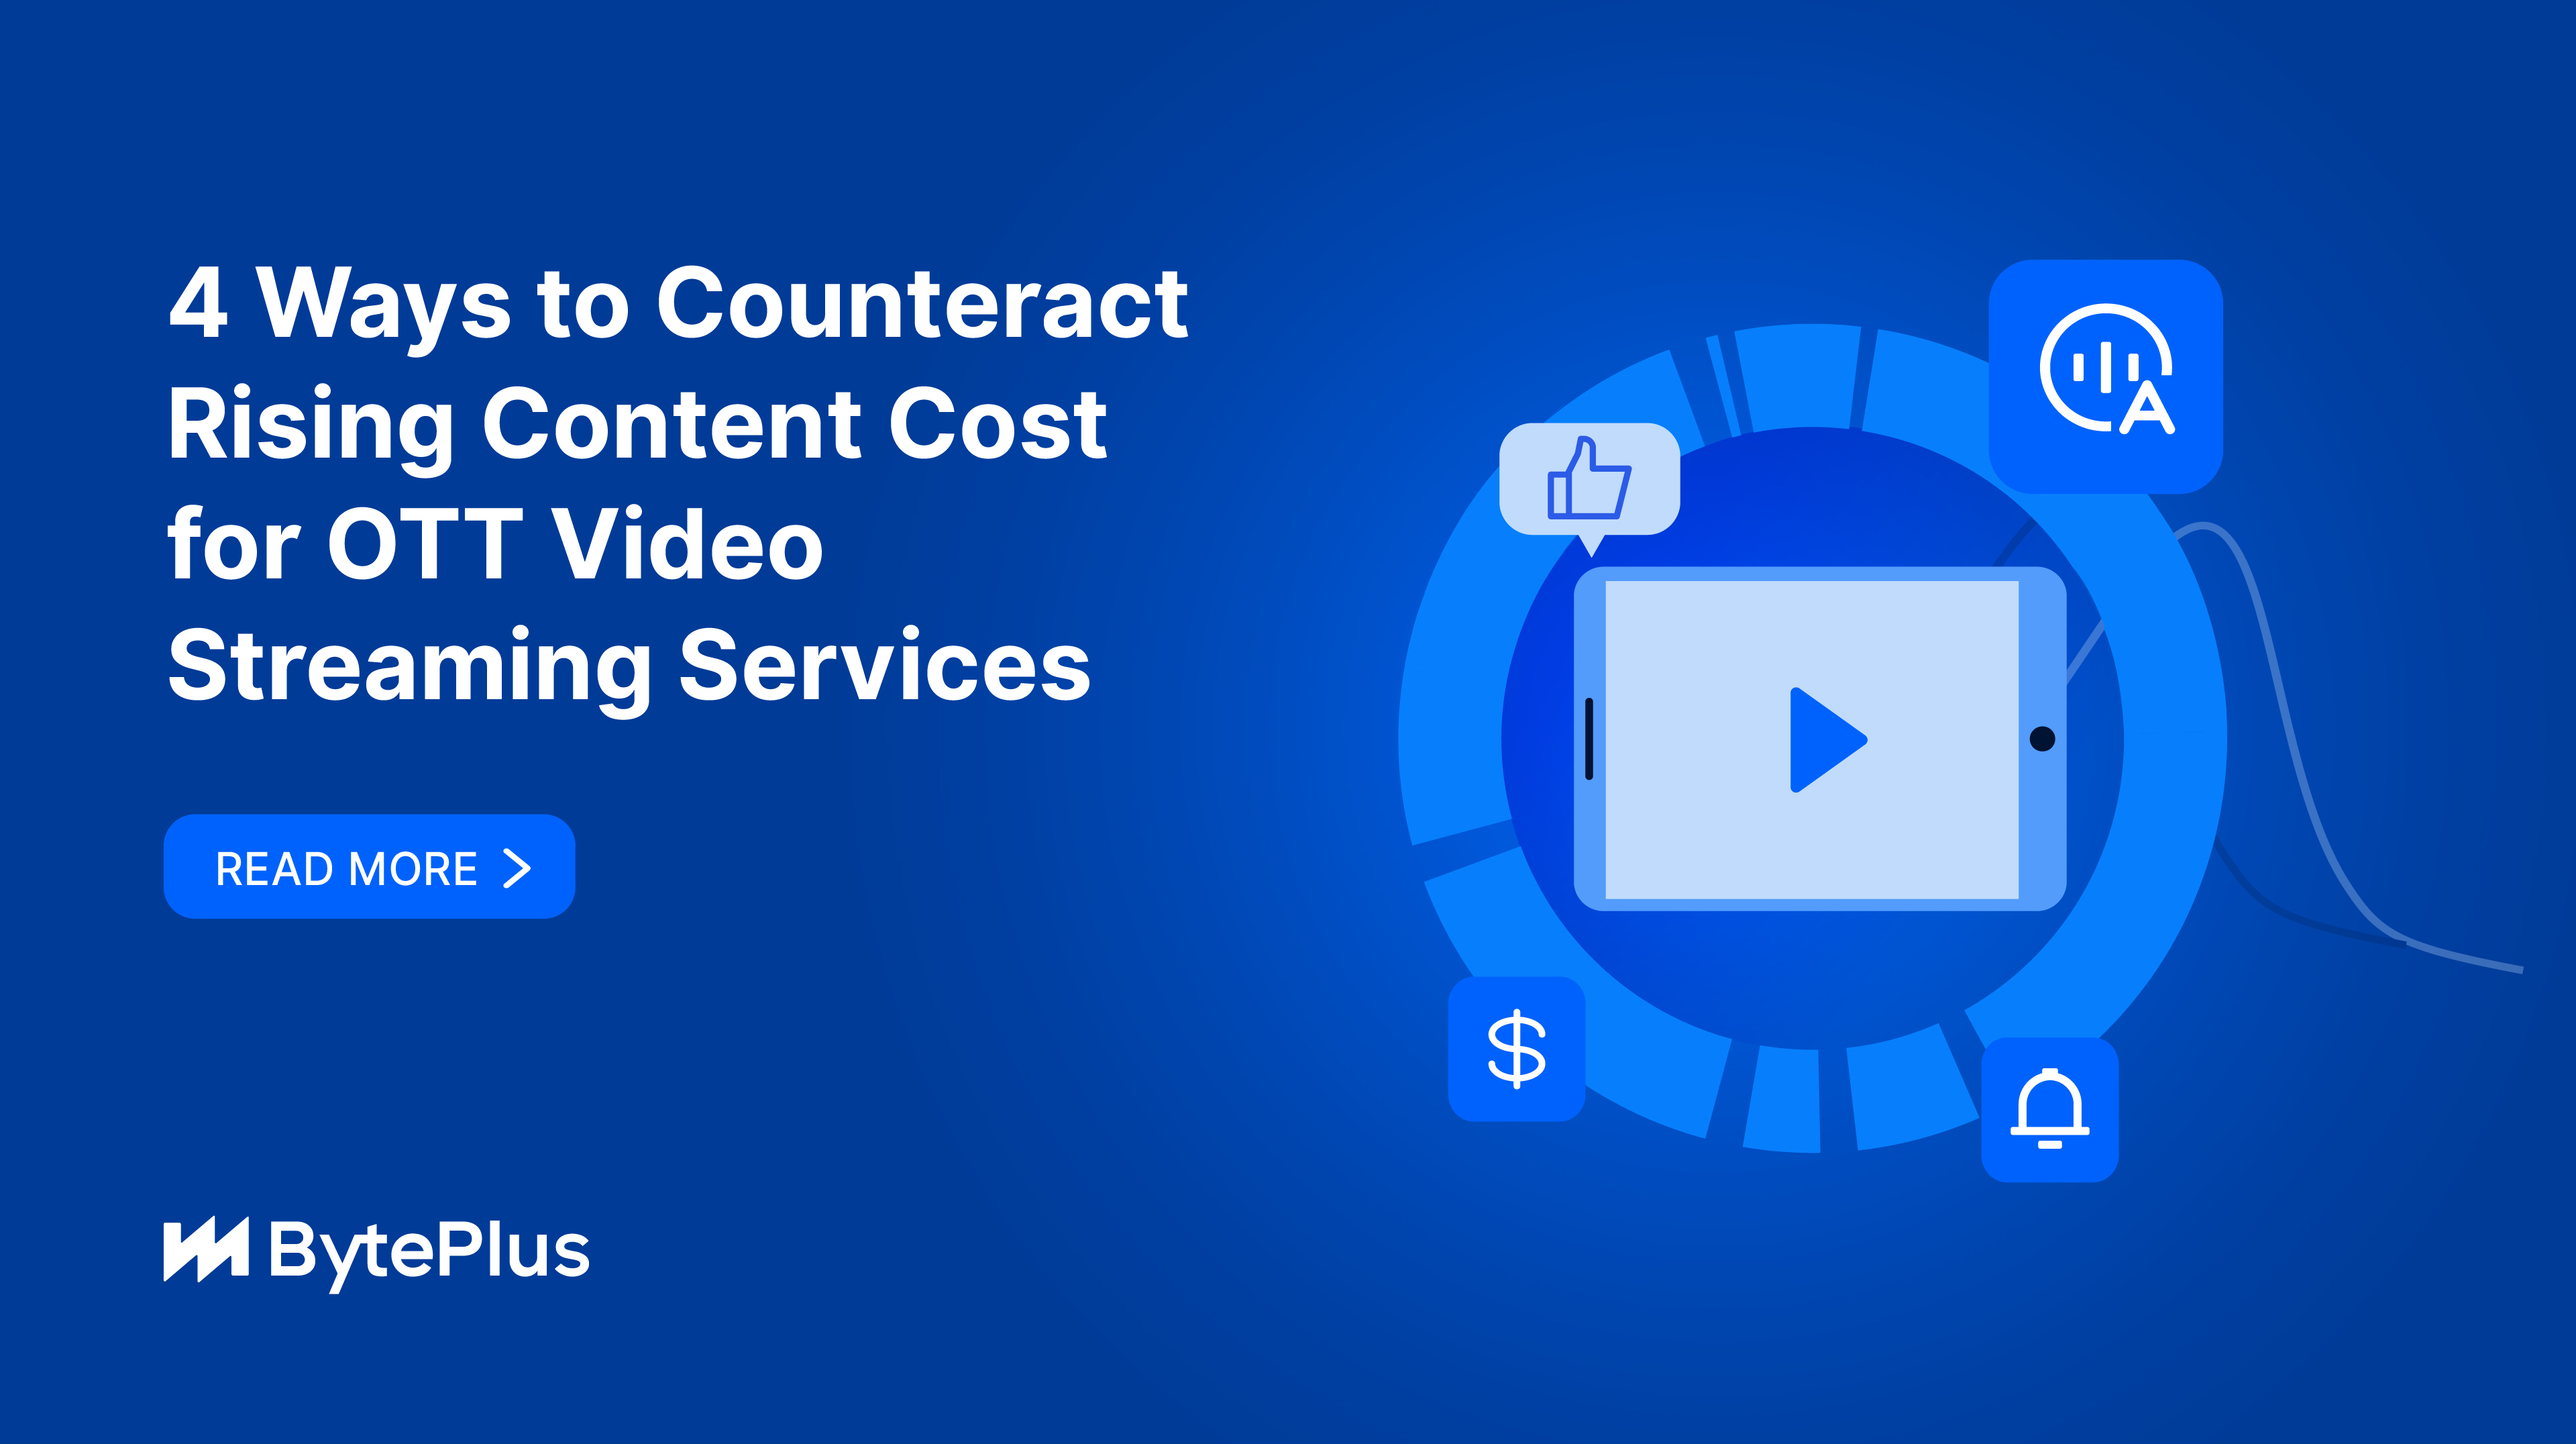 4 Ways to Counteract Rising Content Cost for OTT Video Streaming Services